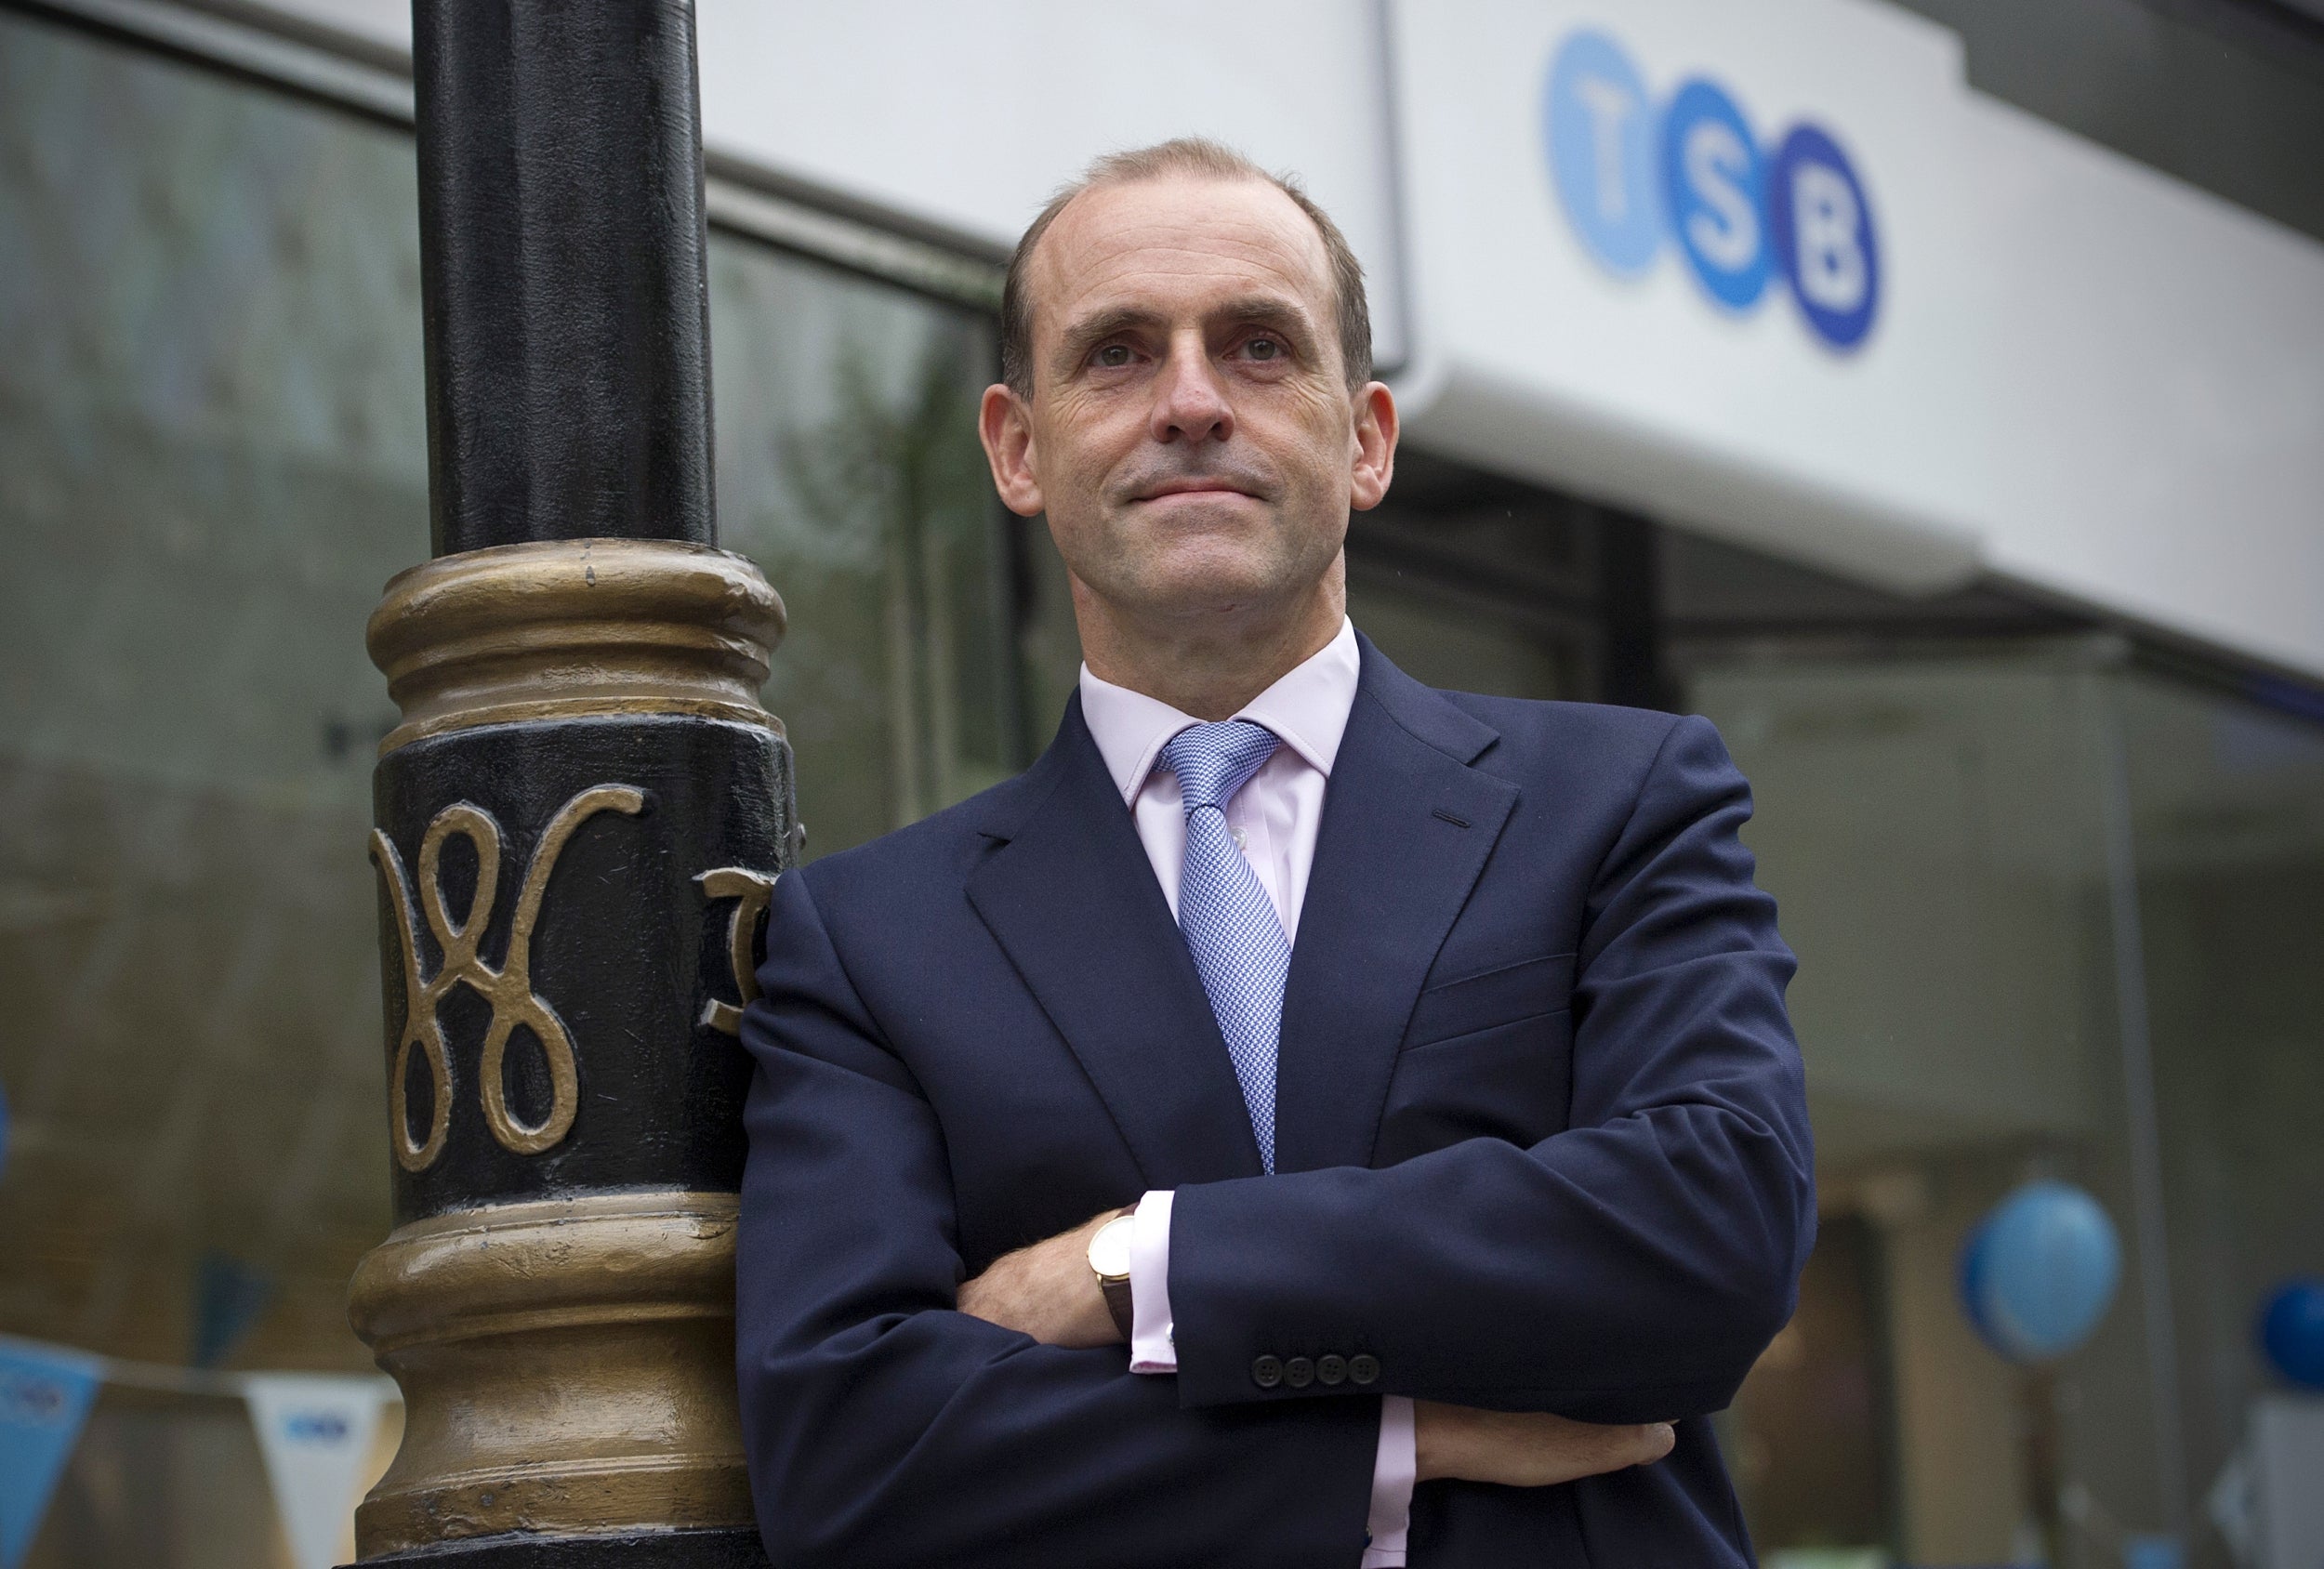 TSB boss Paul Pester stepped down earlier this year after long-running technology problems affected 1.7 million customers